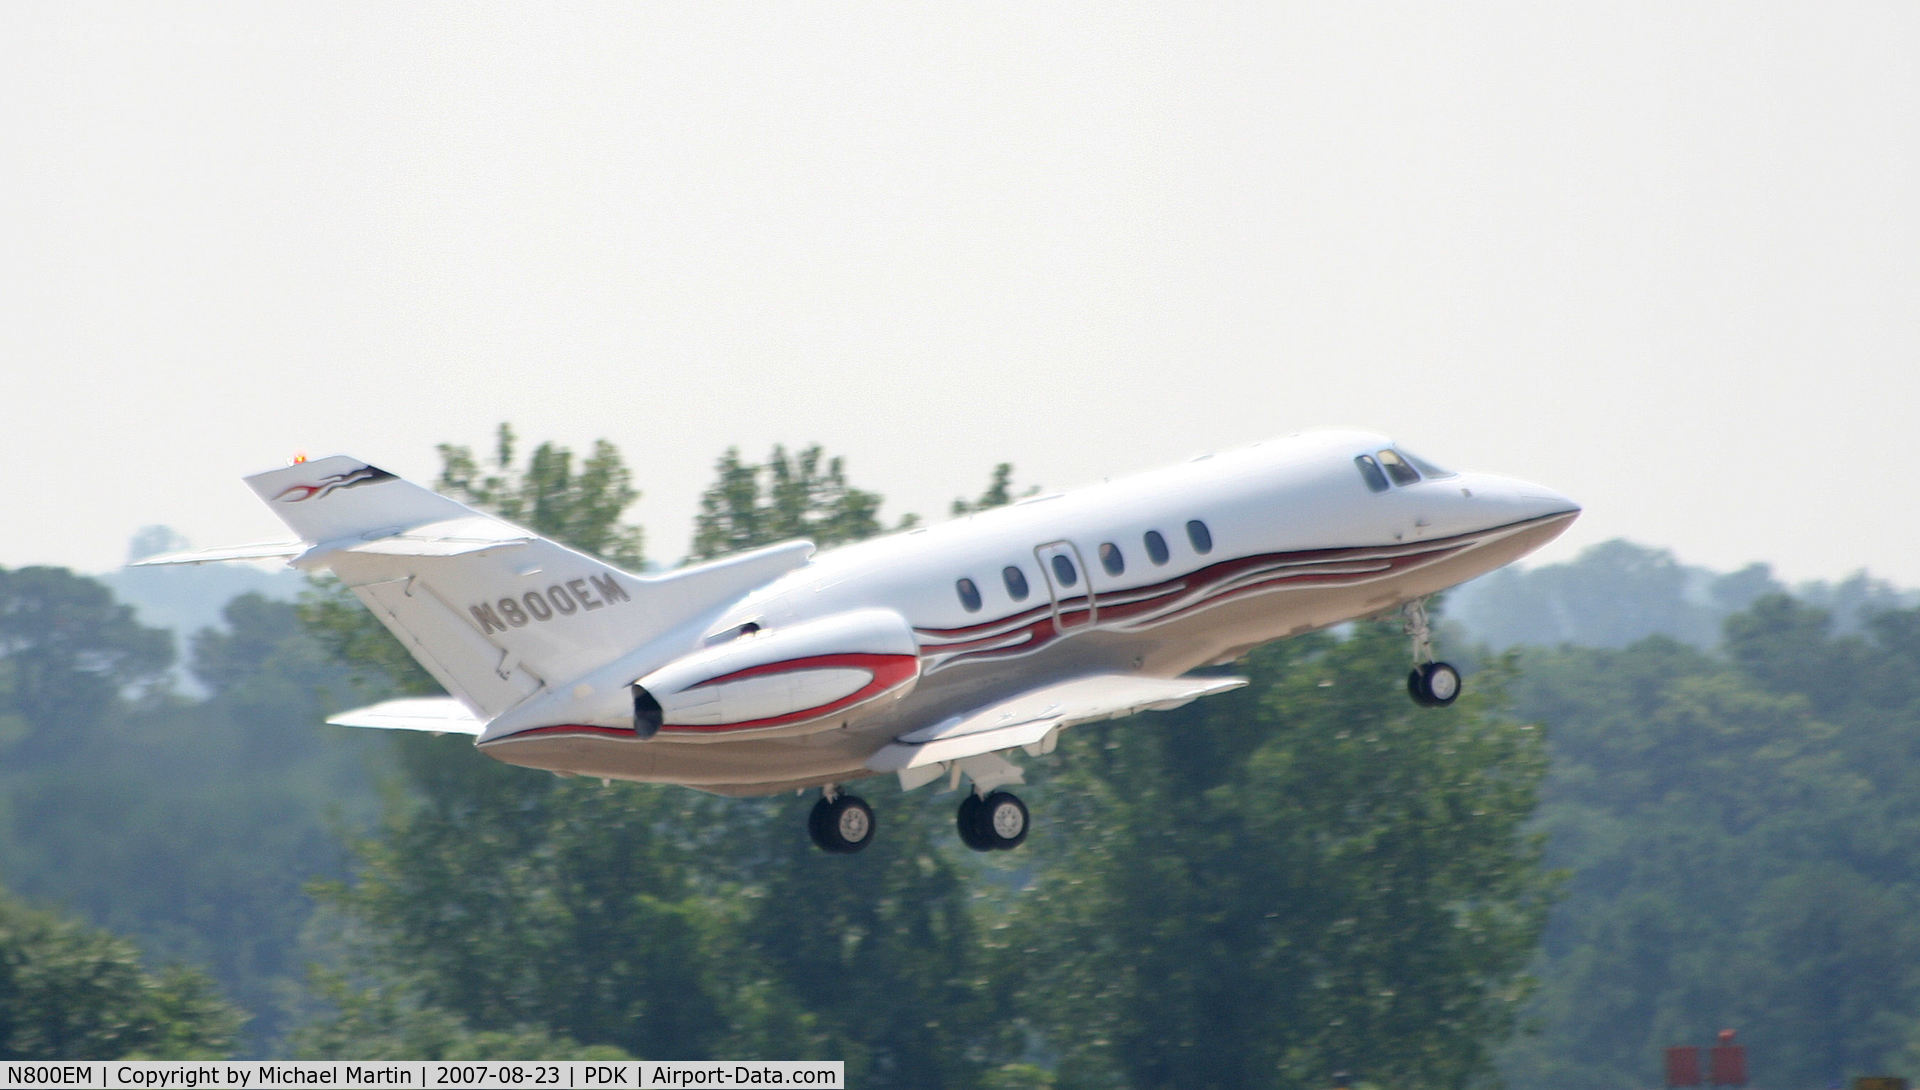 N800EM, 2004 Raytheon Hawker 800XP C/N 258649, Departing PDK for parts unknown!